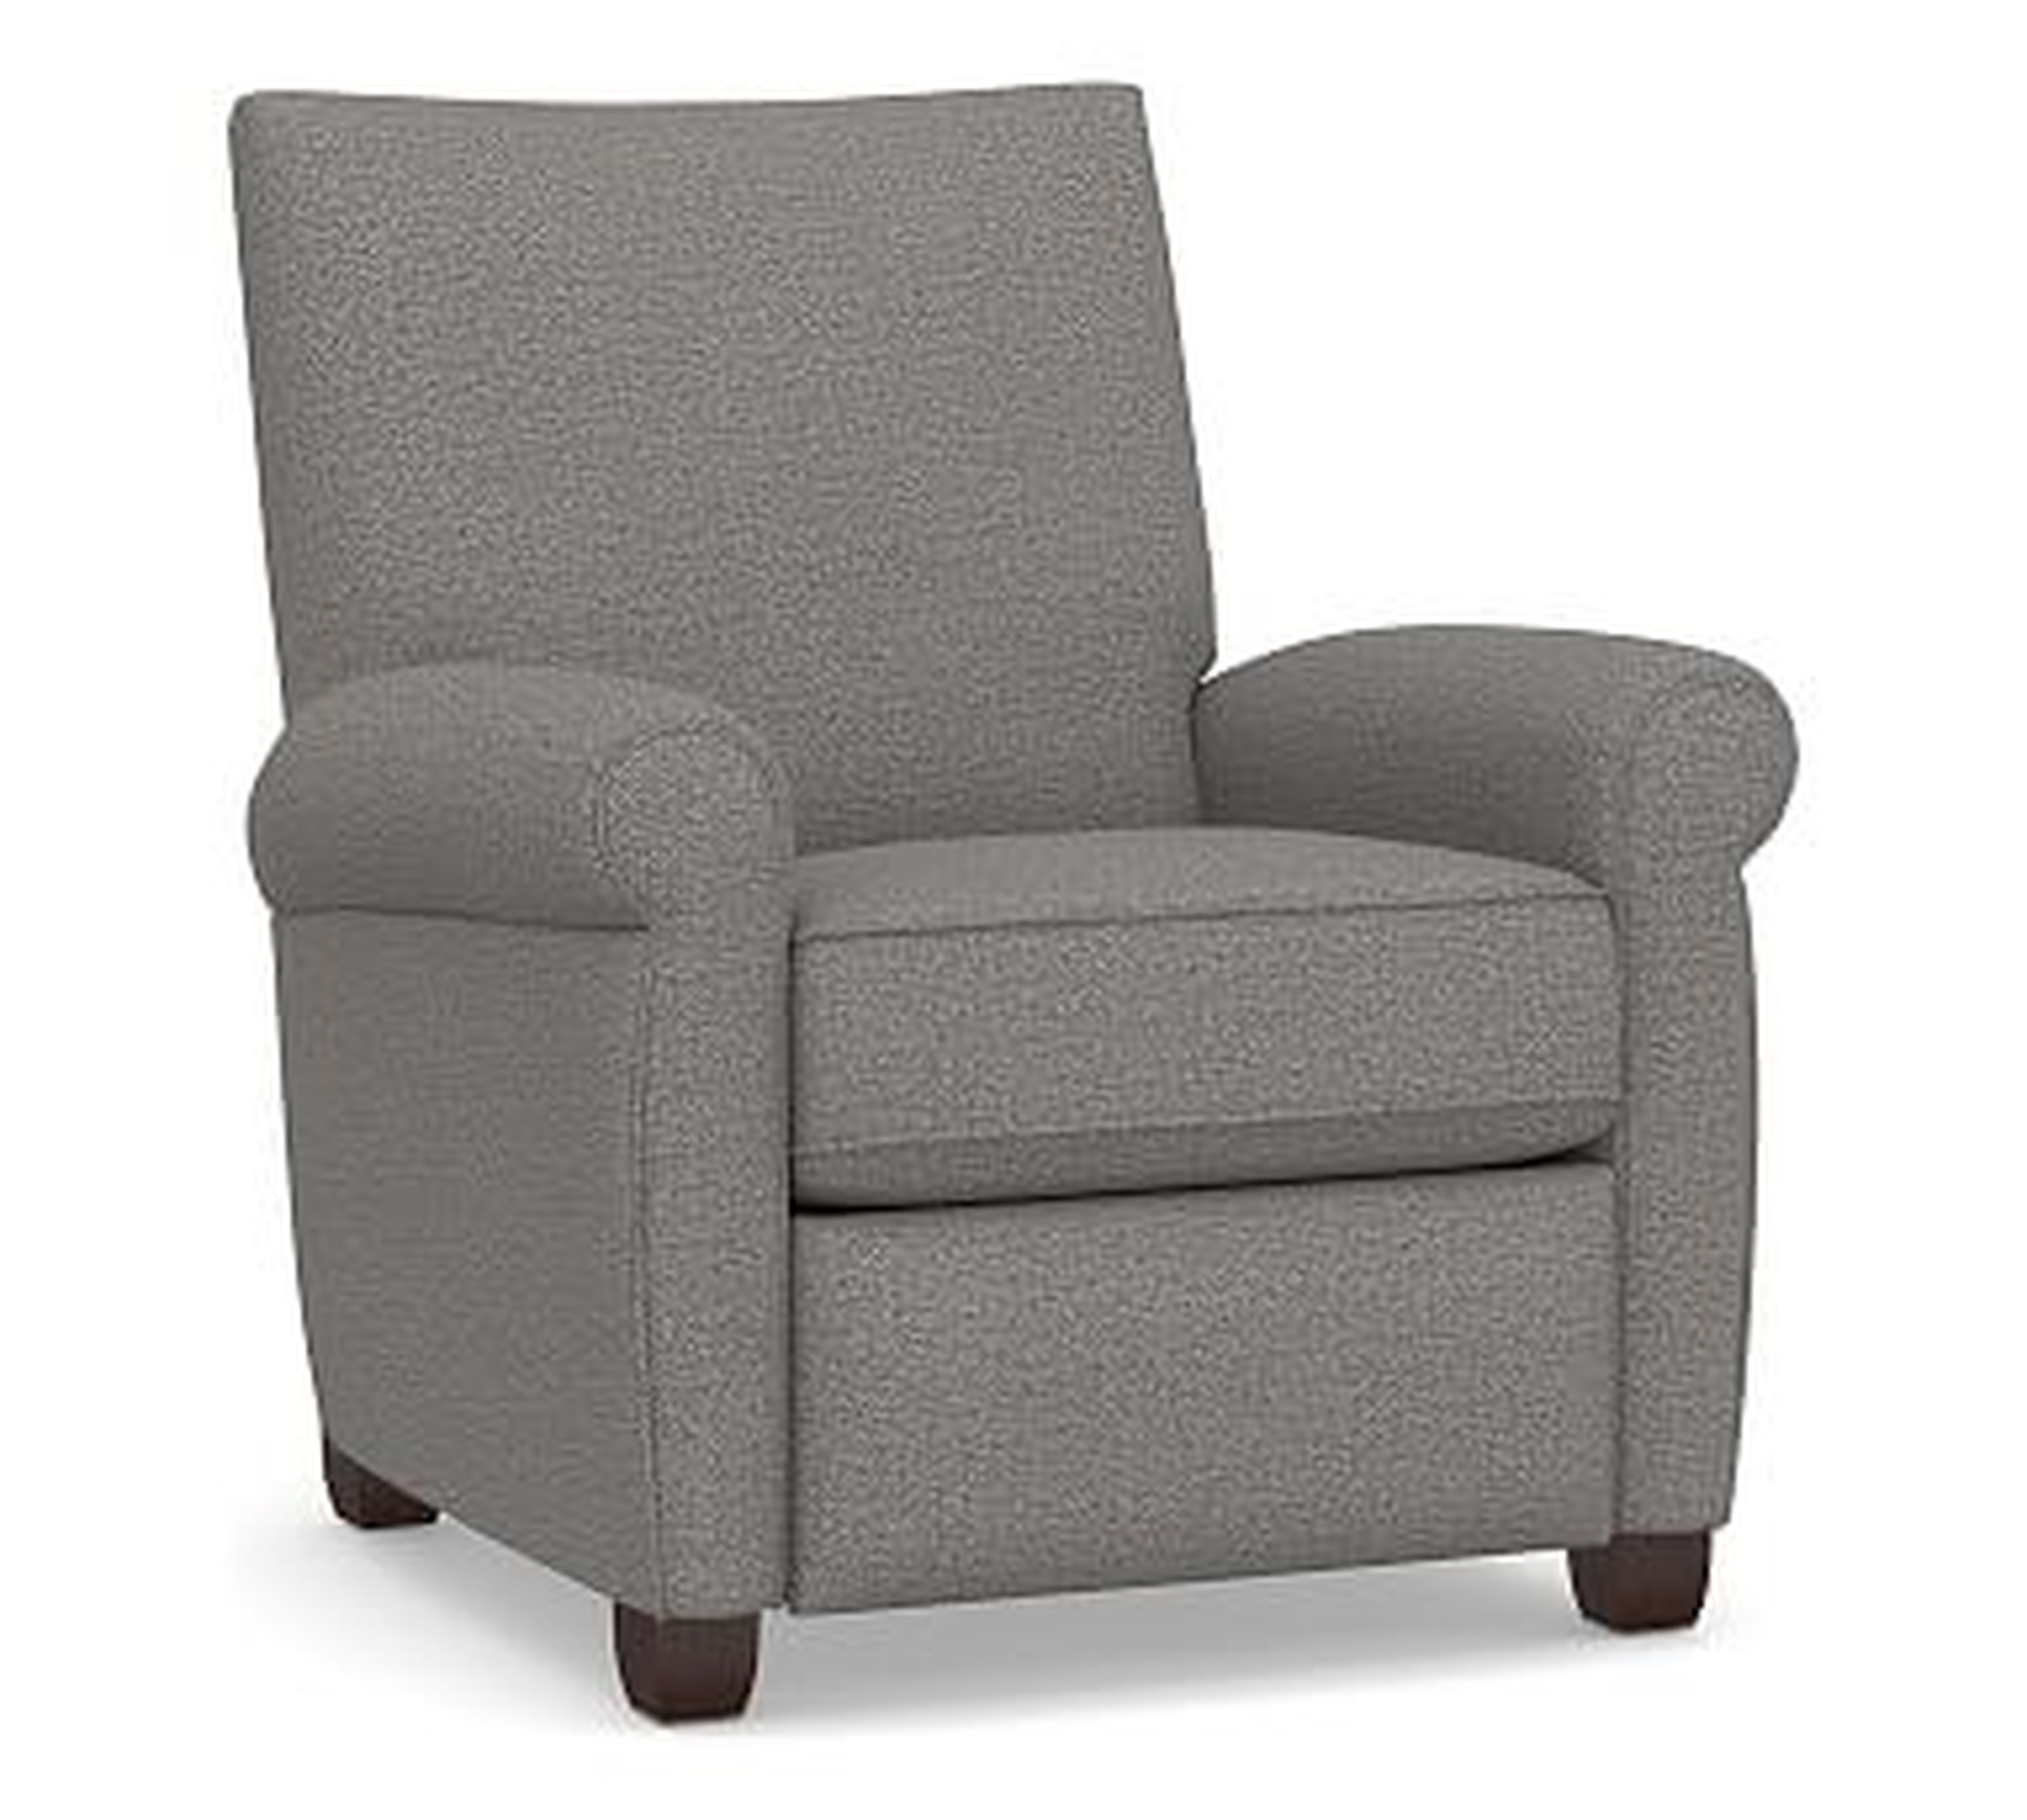 Grayson Roll Arm Upholstered Recliner, Polyester Wrapped Cushions, Performance Chateau Basketweave Blue - Pottery Barn